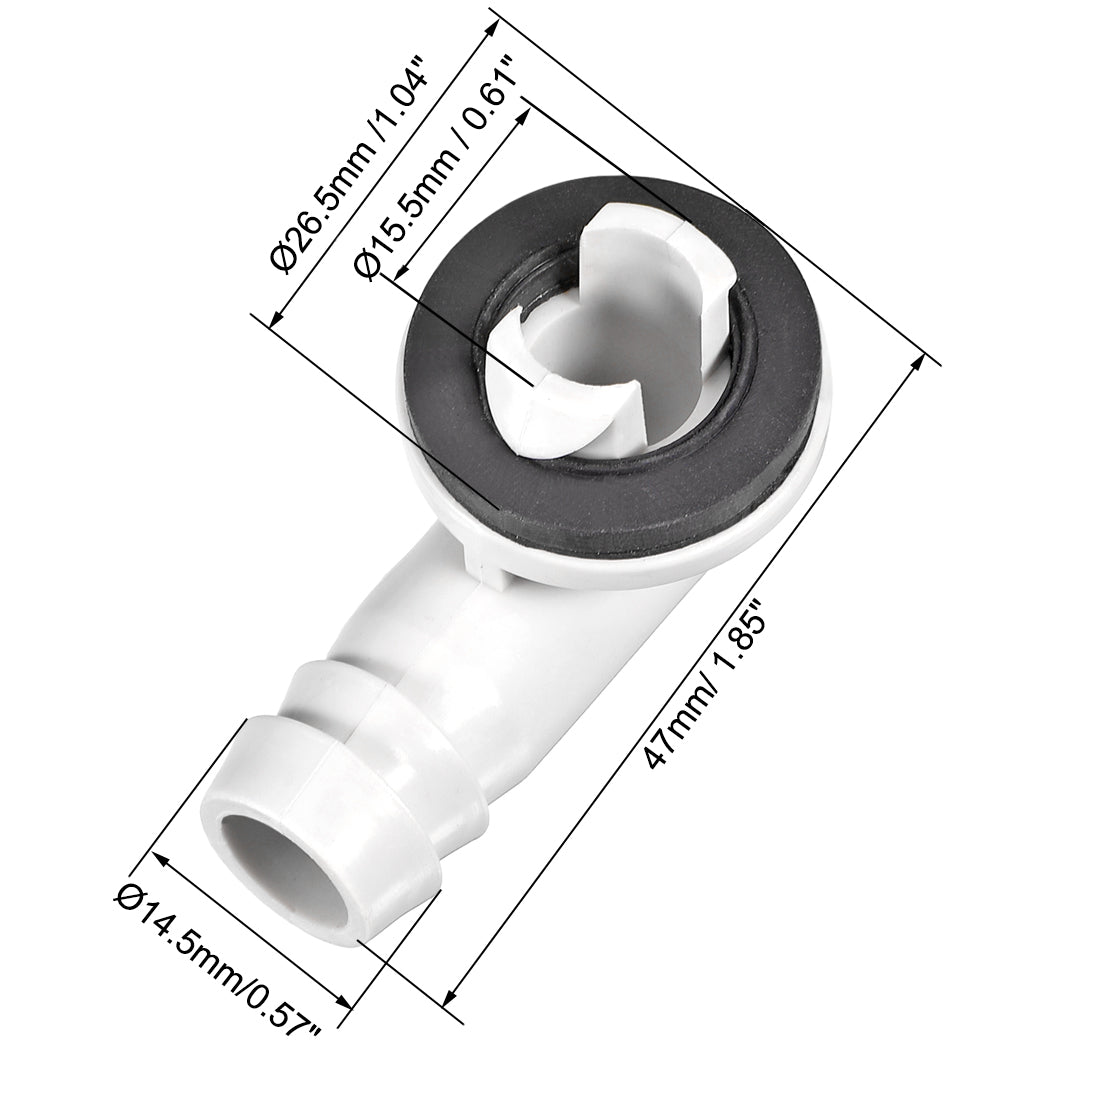 uxcell Uxcell Air Conditioner Drain Hose Connector Elbow Fitting with Rubber Ring for Mini-Split Units and Window AC Unit 15mm